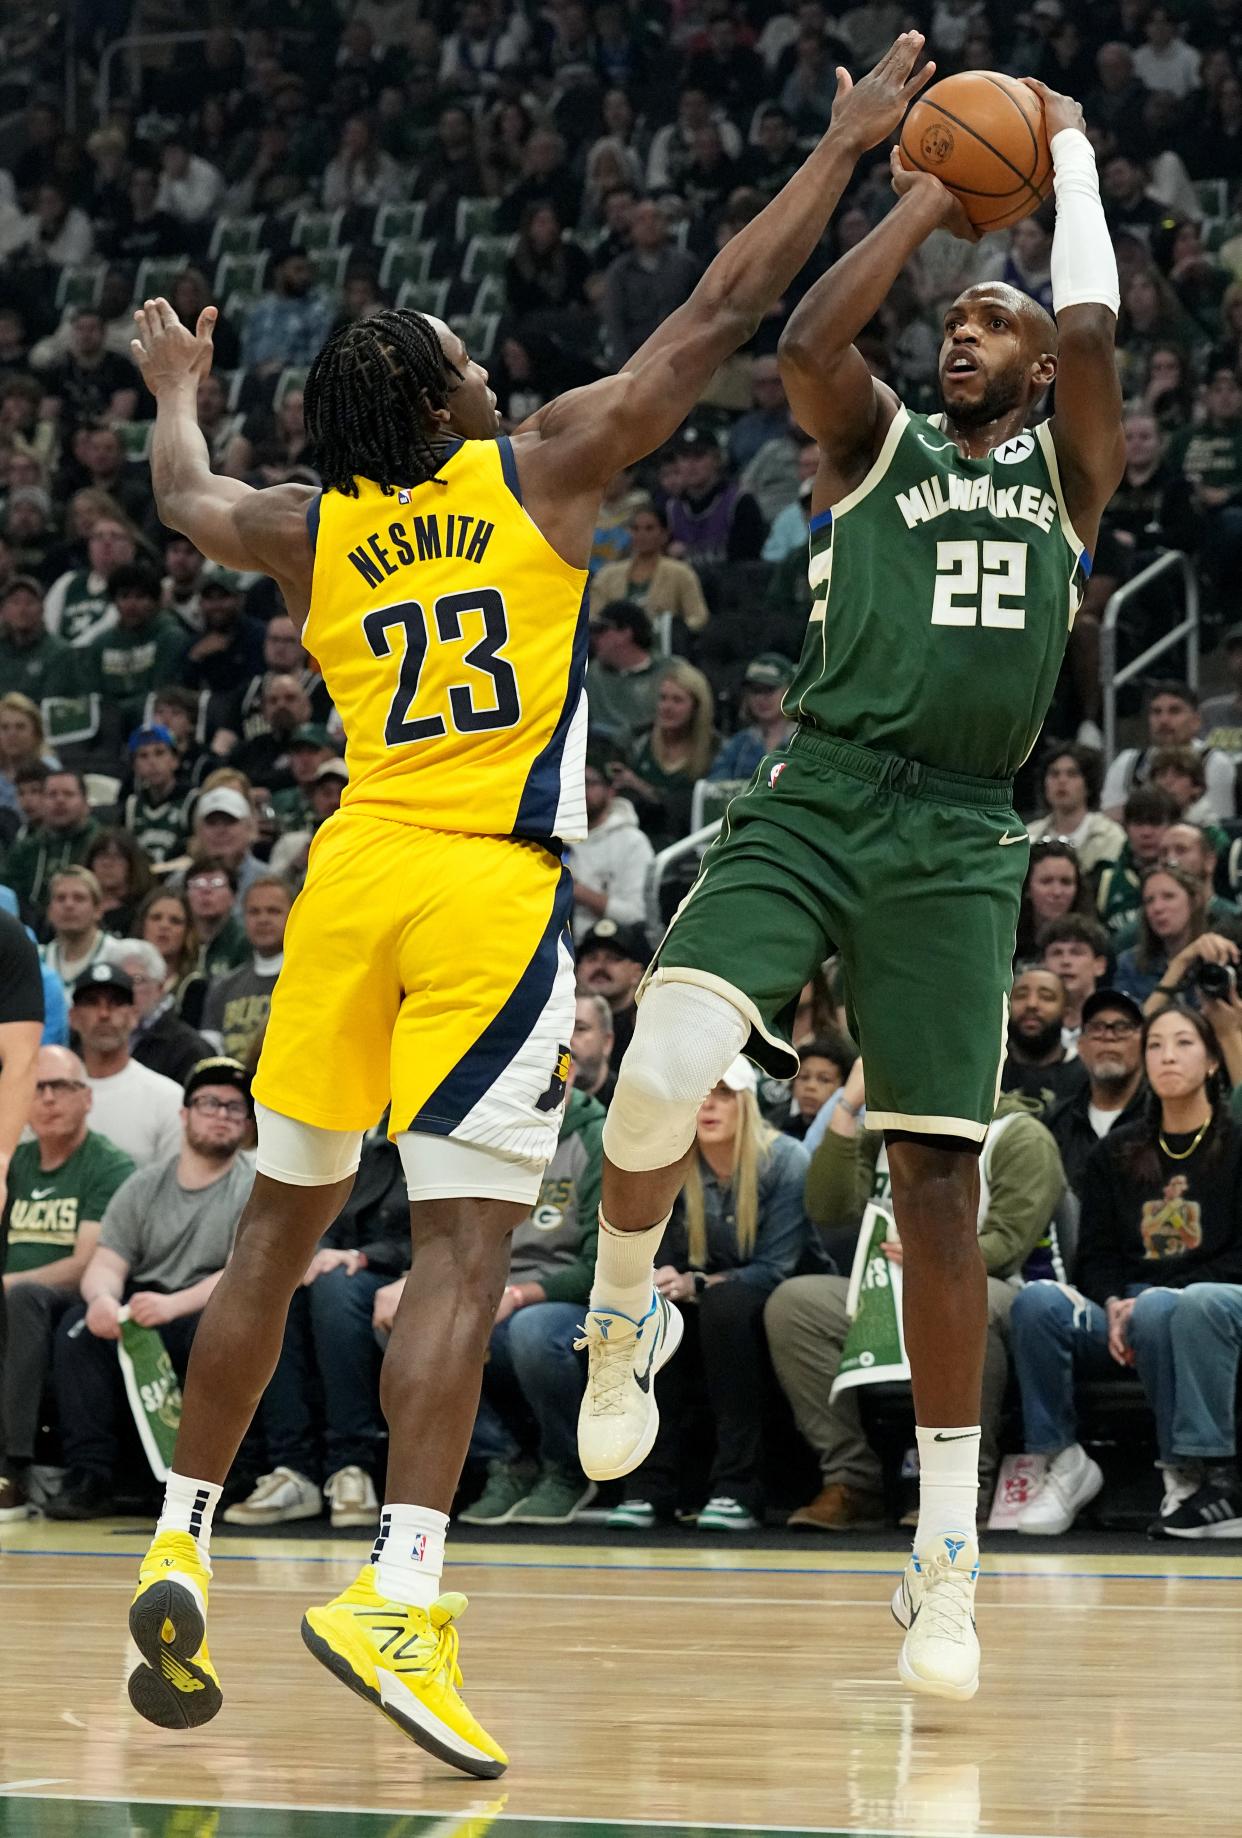 Bucks forward Khris Middleton had 23 points with 10 rebounds and four assists in Game 1 of the playoff series against the Pacers on Sunday.